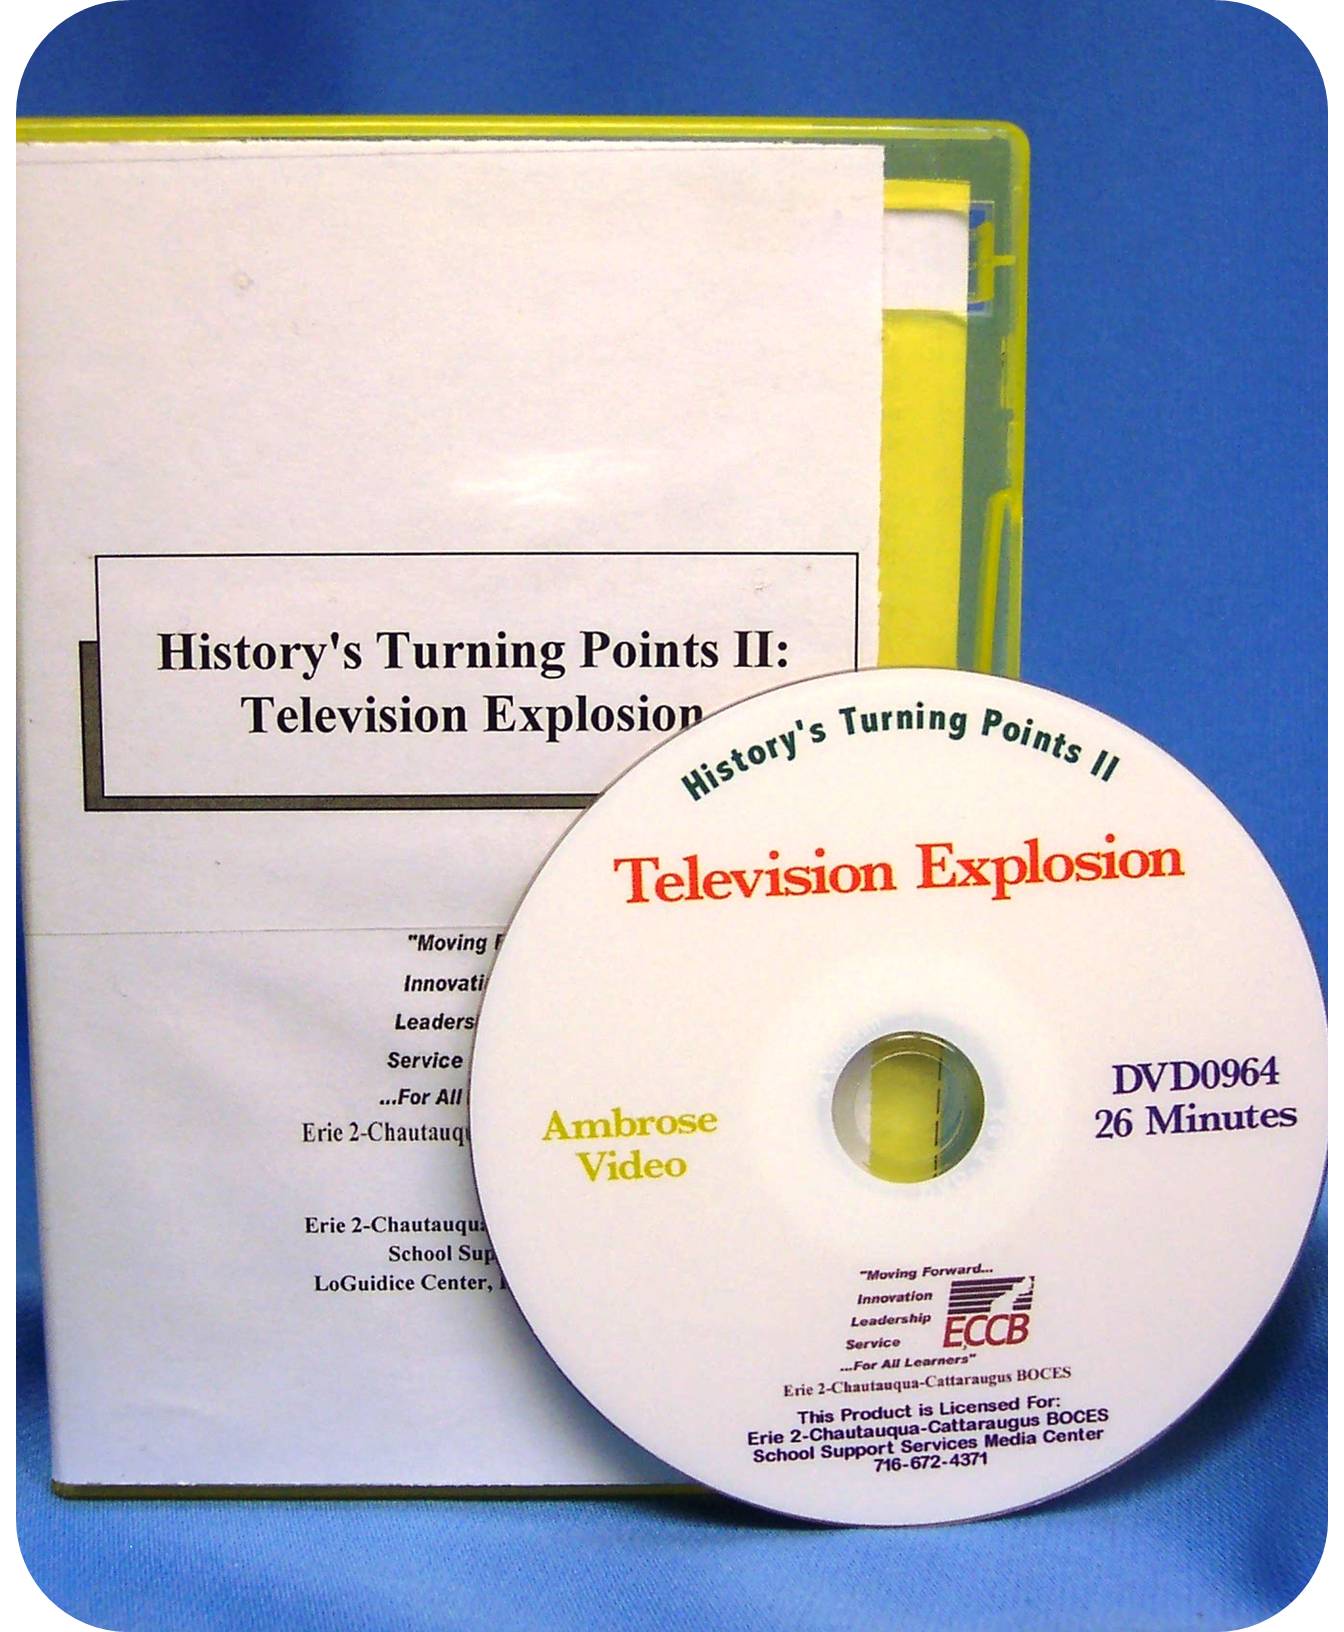 History's Turning Points II: Television Explosion